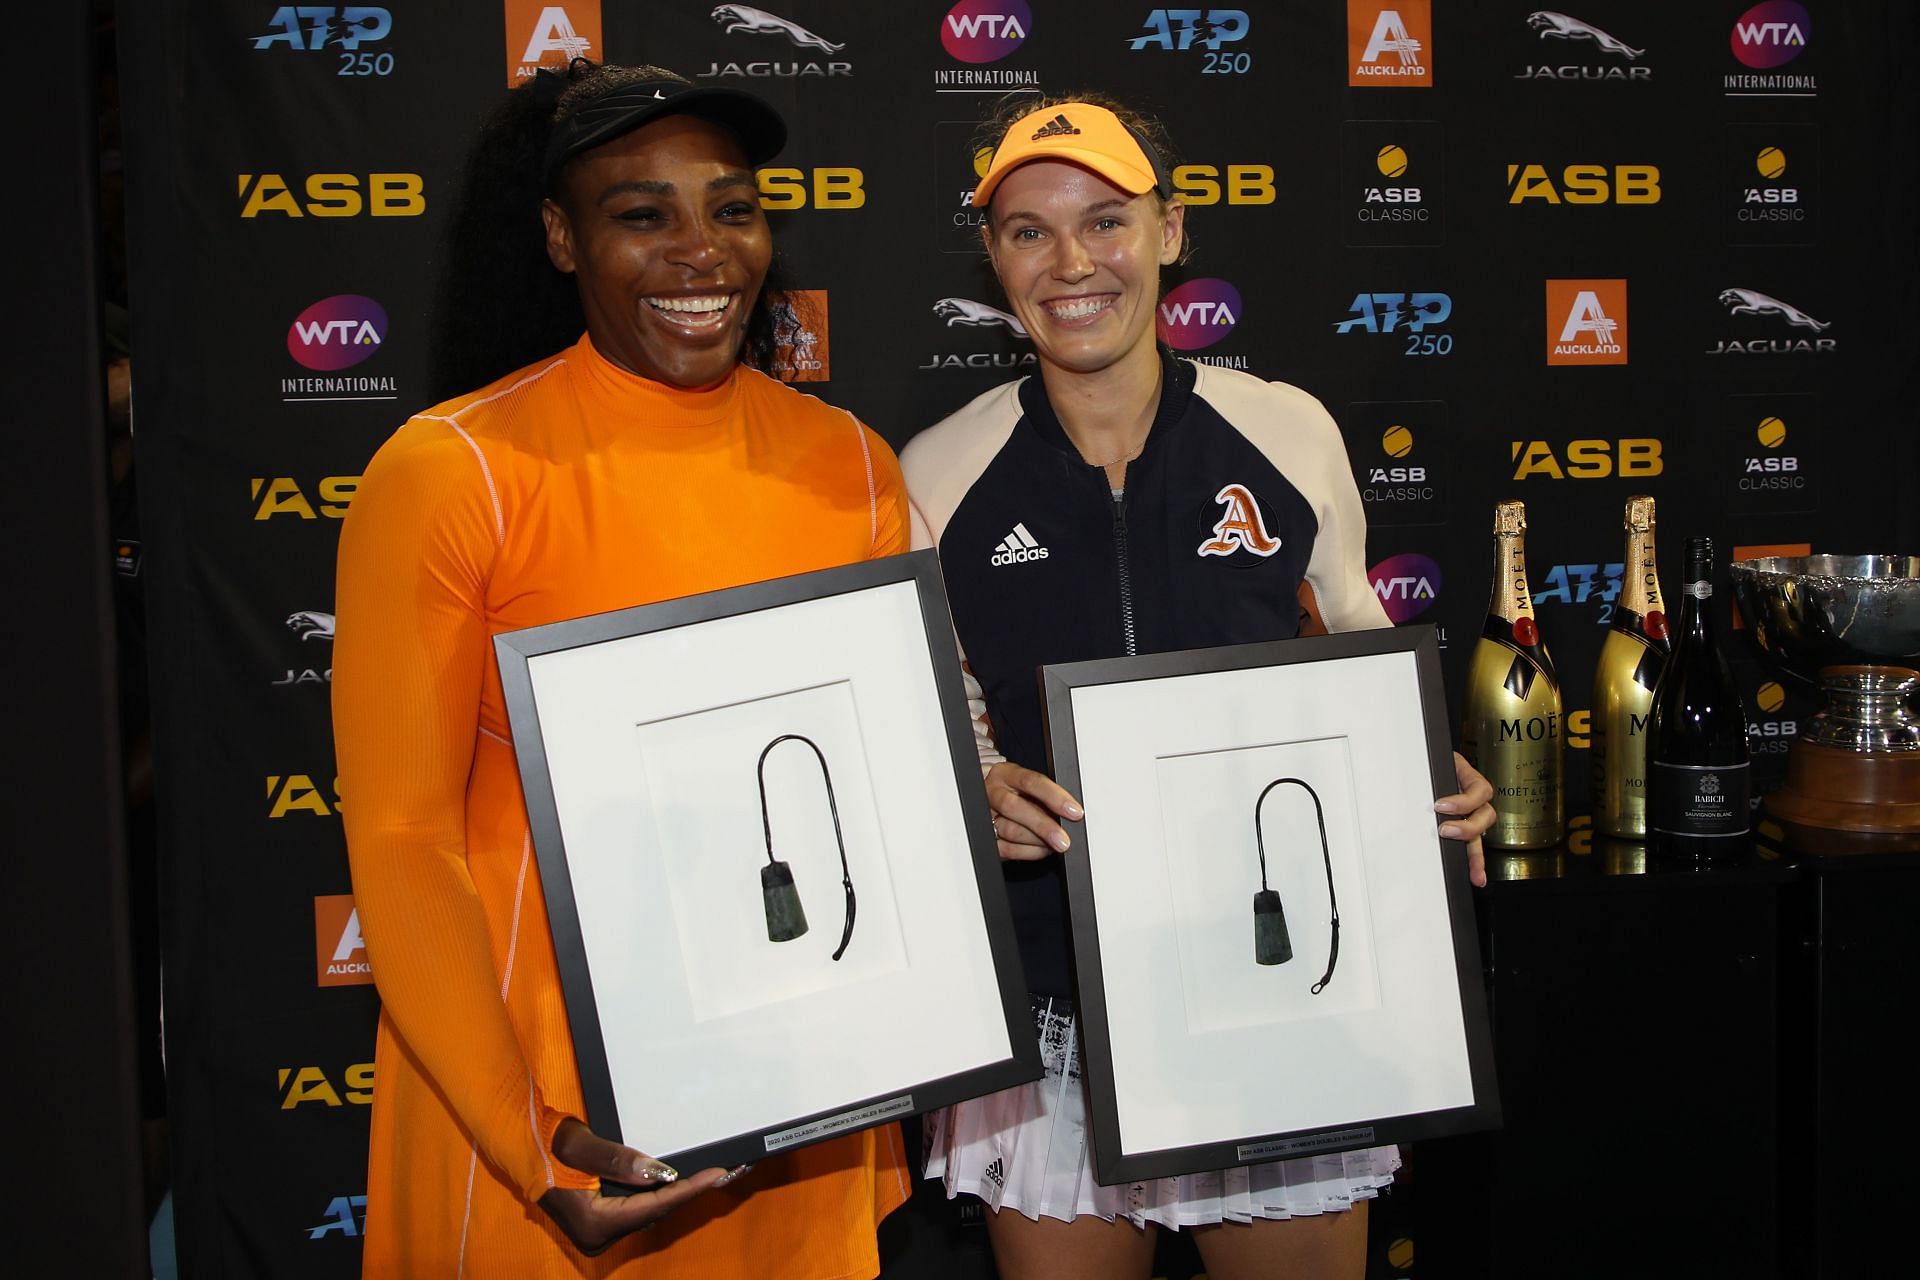 Friend more than rivals - Williams and Wozniacki